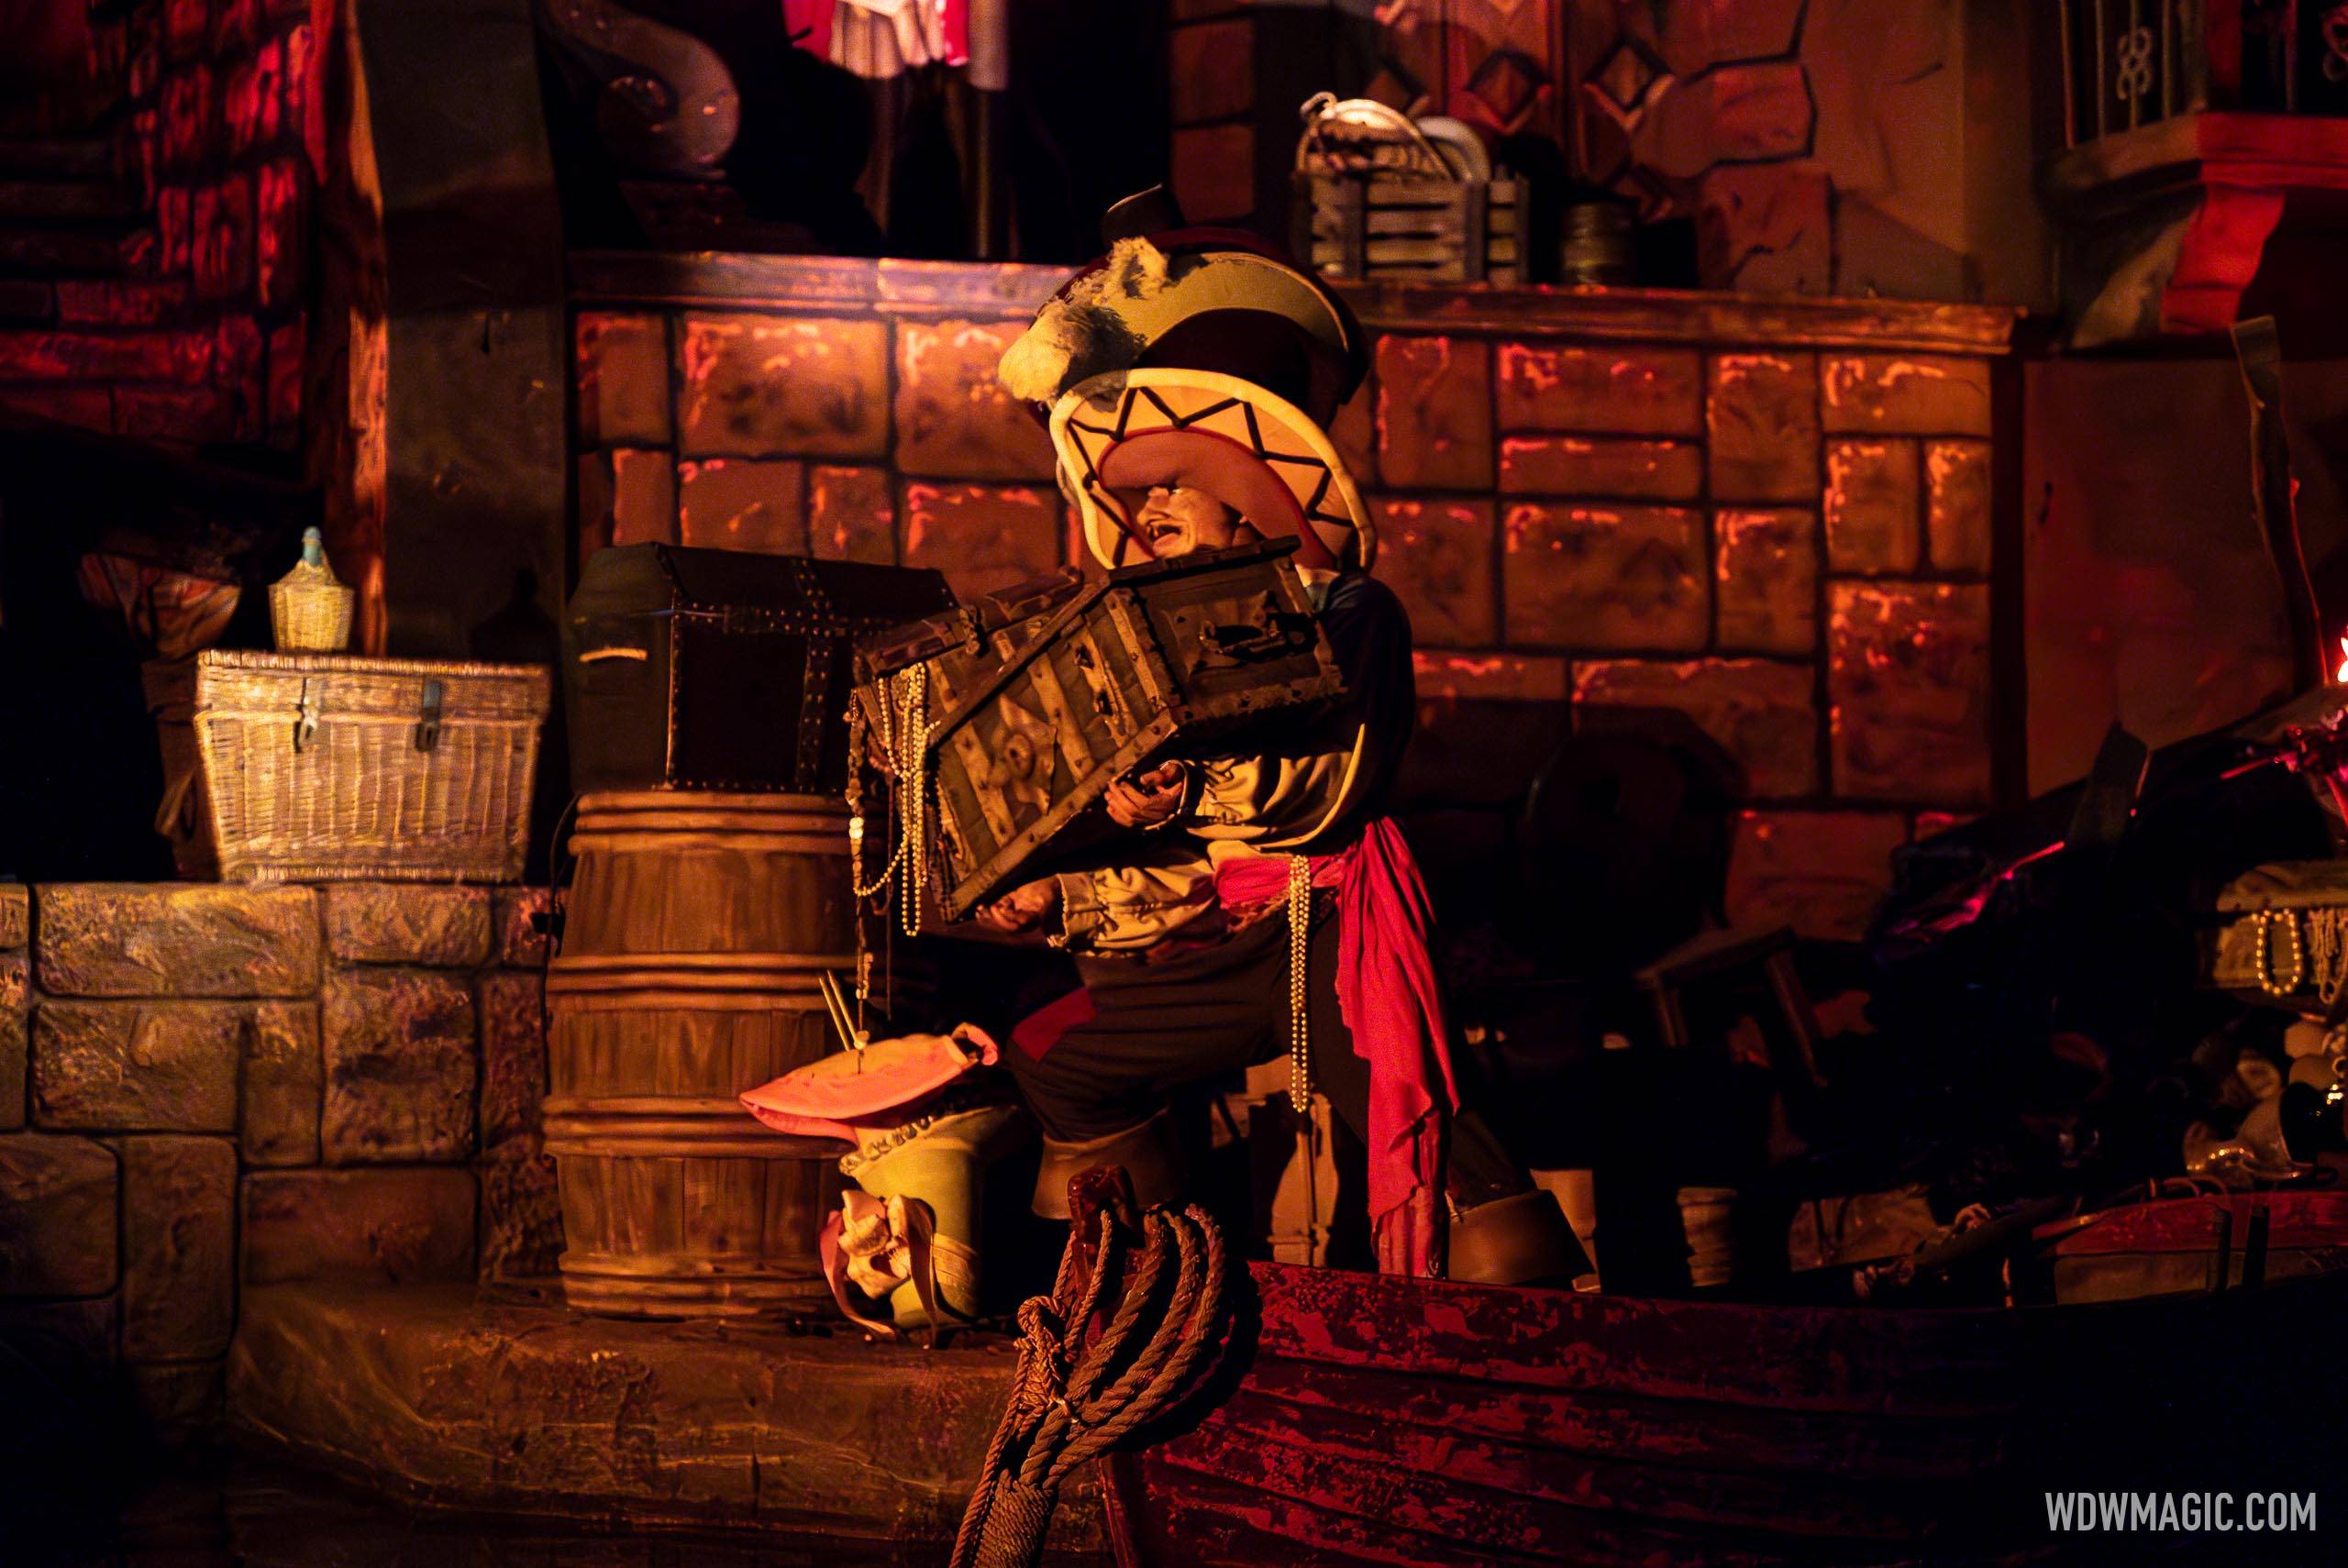 Pirates of the Caribbean show scenes